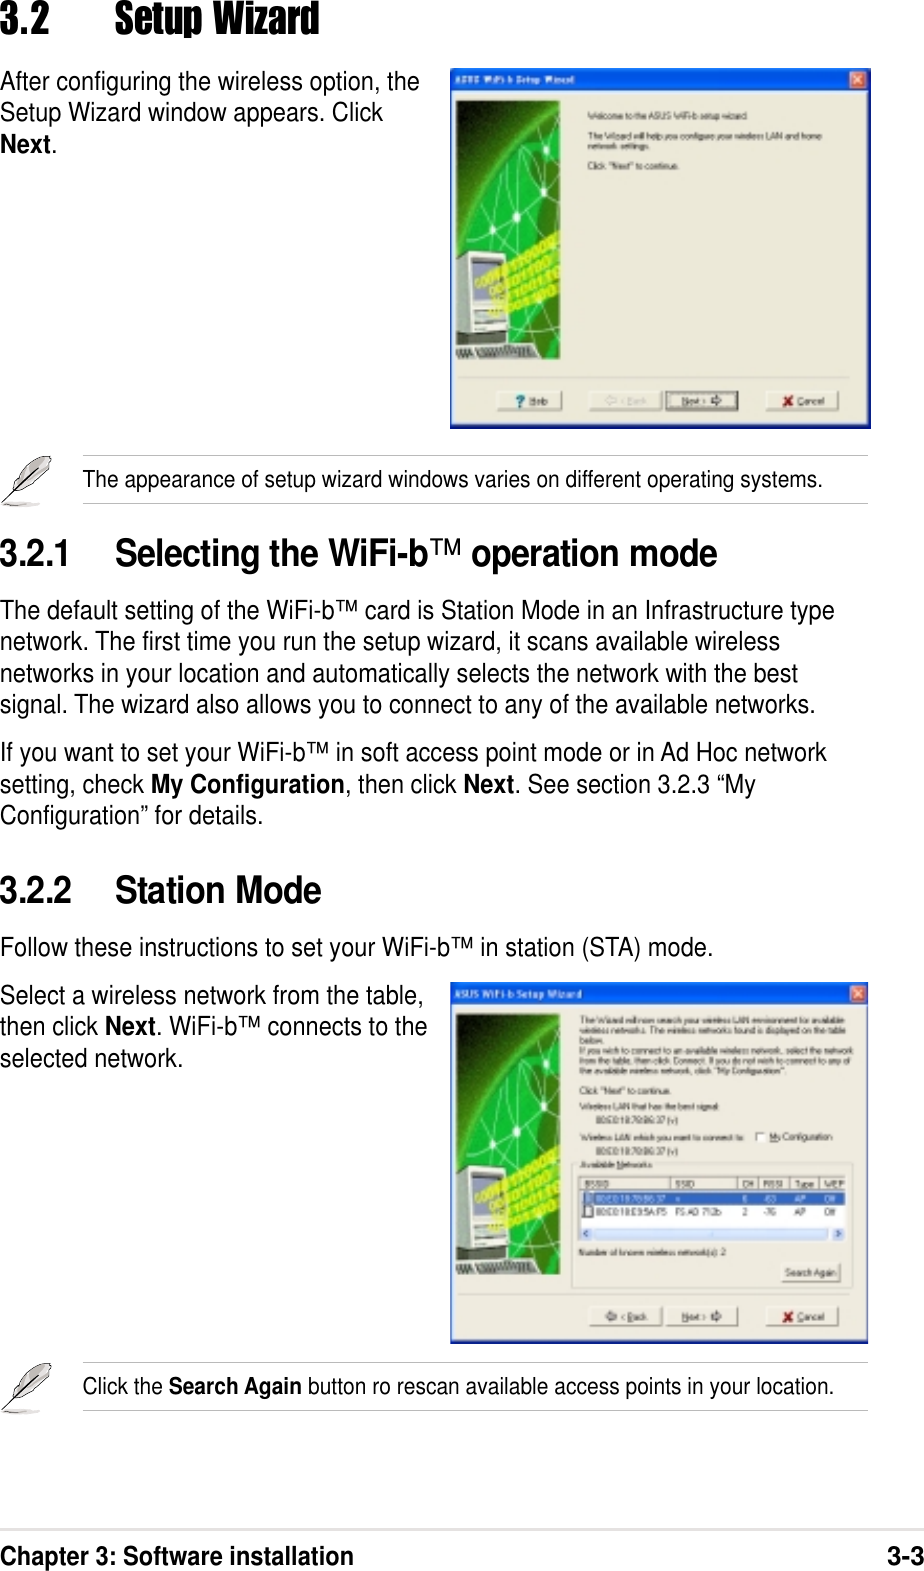 Chapter 3: Software installation3-33.2 Setup WizardAfter configuring the wireless option, theSetup Wizard window appears. ClickNext.3.2.1 Selecting the WiFi-b™ operation modeThe default setting of the WiFi-b™ card is Station Mode in an Infrastructure typenetwork. The first time you run the setup wizard, it scans available wirelessnetworks in your location and automatically selects the network with the bestsignal. The wizard also allows you to connect to any of the available networks.If you want to set your WiFi-b™ in soft access point mode or in Ad Hoc networksetting, check My Configuration, then click Next. See section 3.2.3 “MyConfiguration” for details.3.2.2 Station ModeFollow these instructions to set your WiFi-b™ in station (STA) mode.Select a wireless network from the table,then click Next. WiFi-b™ connects to theselected network.Click the Search Again button ro rescan available access points in your location.The appearance of setup wizard windows varies on different operating systems.